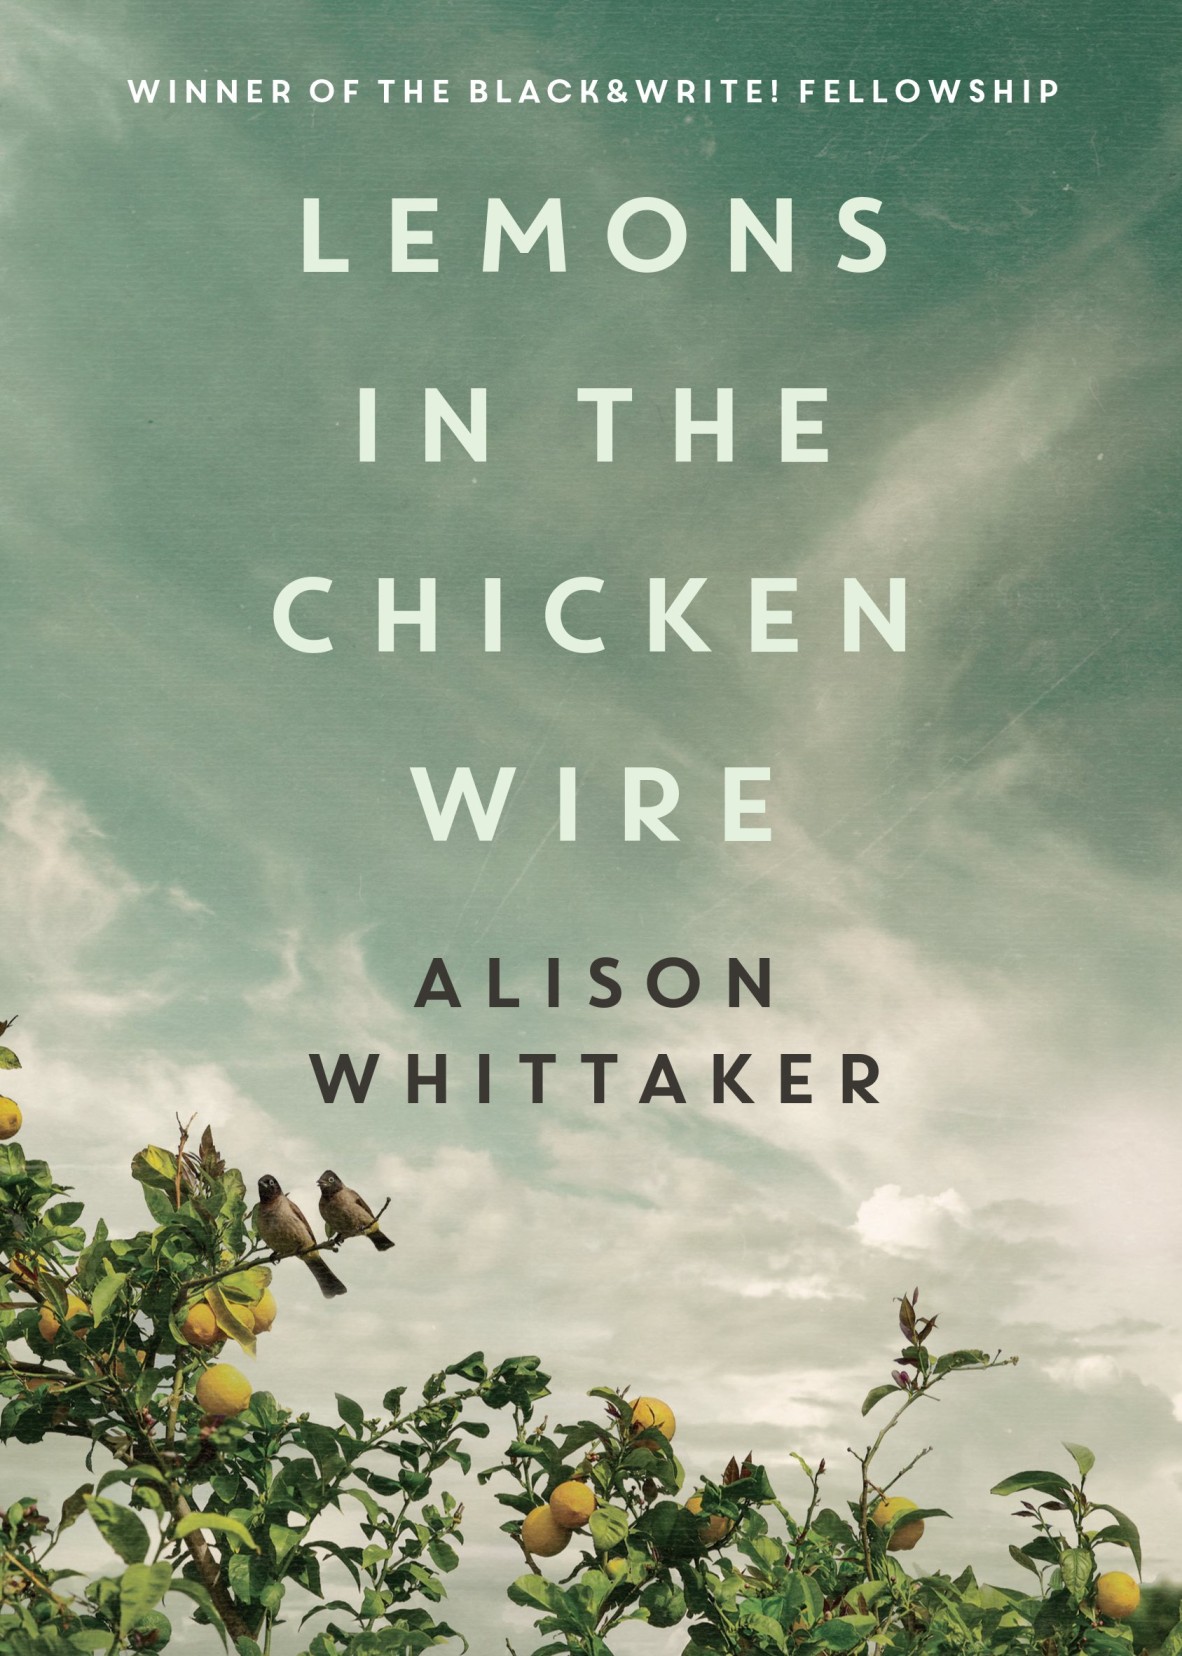 A book cover showing lemon trees beneath a blue sky The text reads Lemons in the chicken wire Alison Whittaker